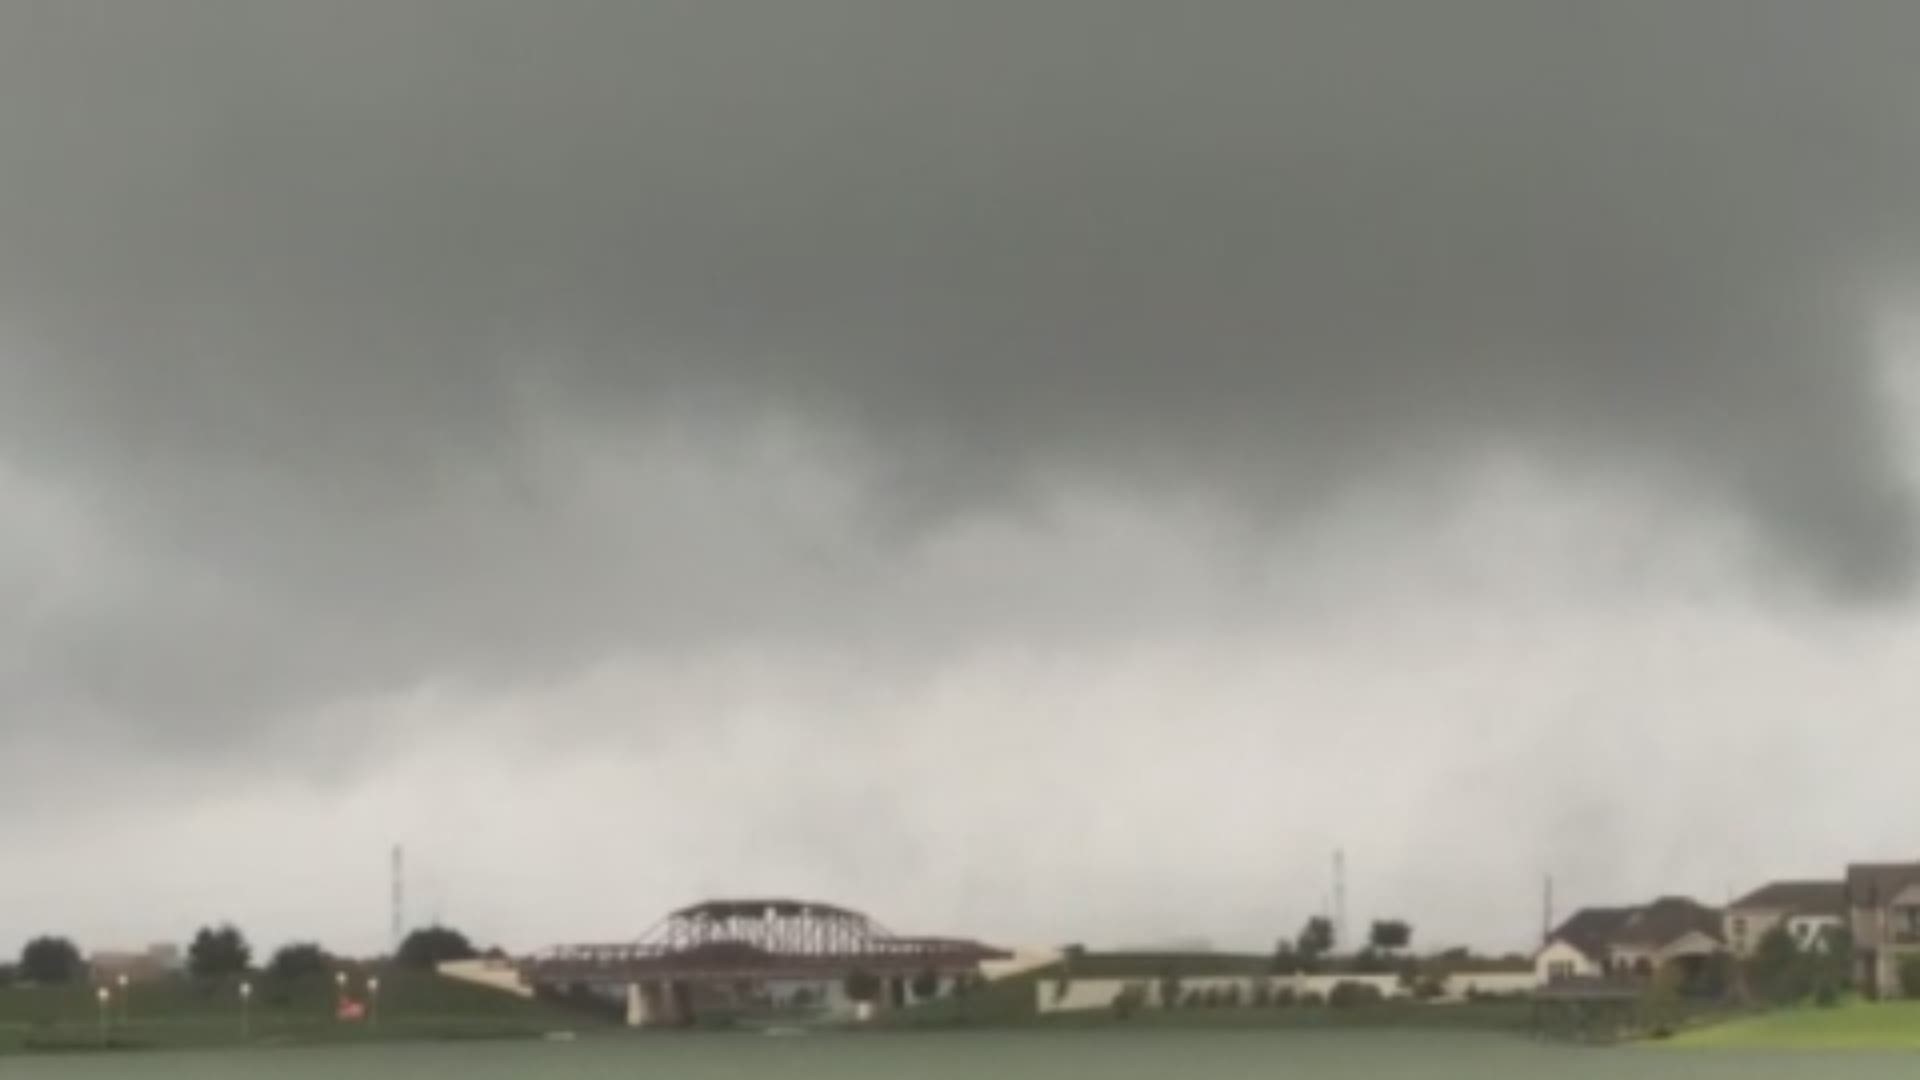 KHOU 11 viewer, Sandra Judge, sent in this video of a tornado touching down in the Towne Lake area in Cypress, Texas.